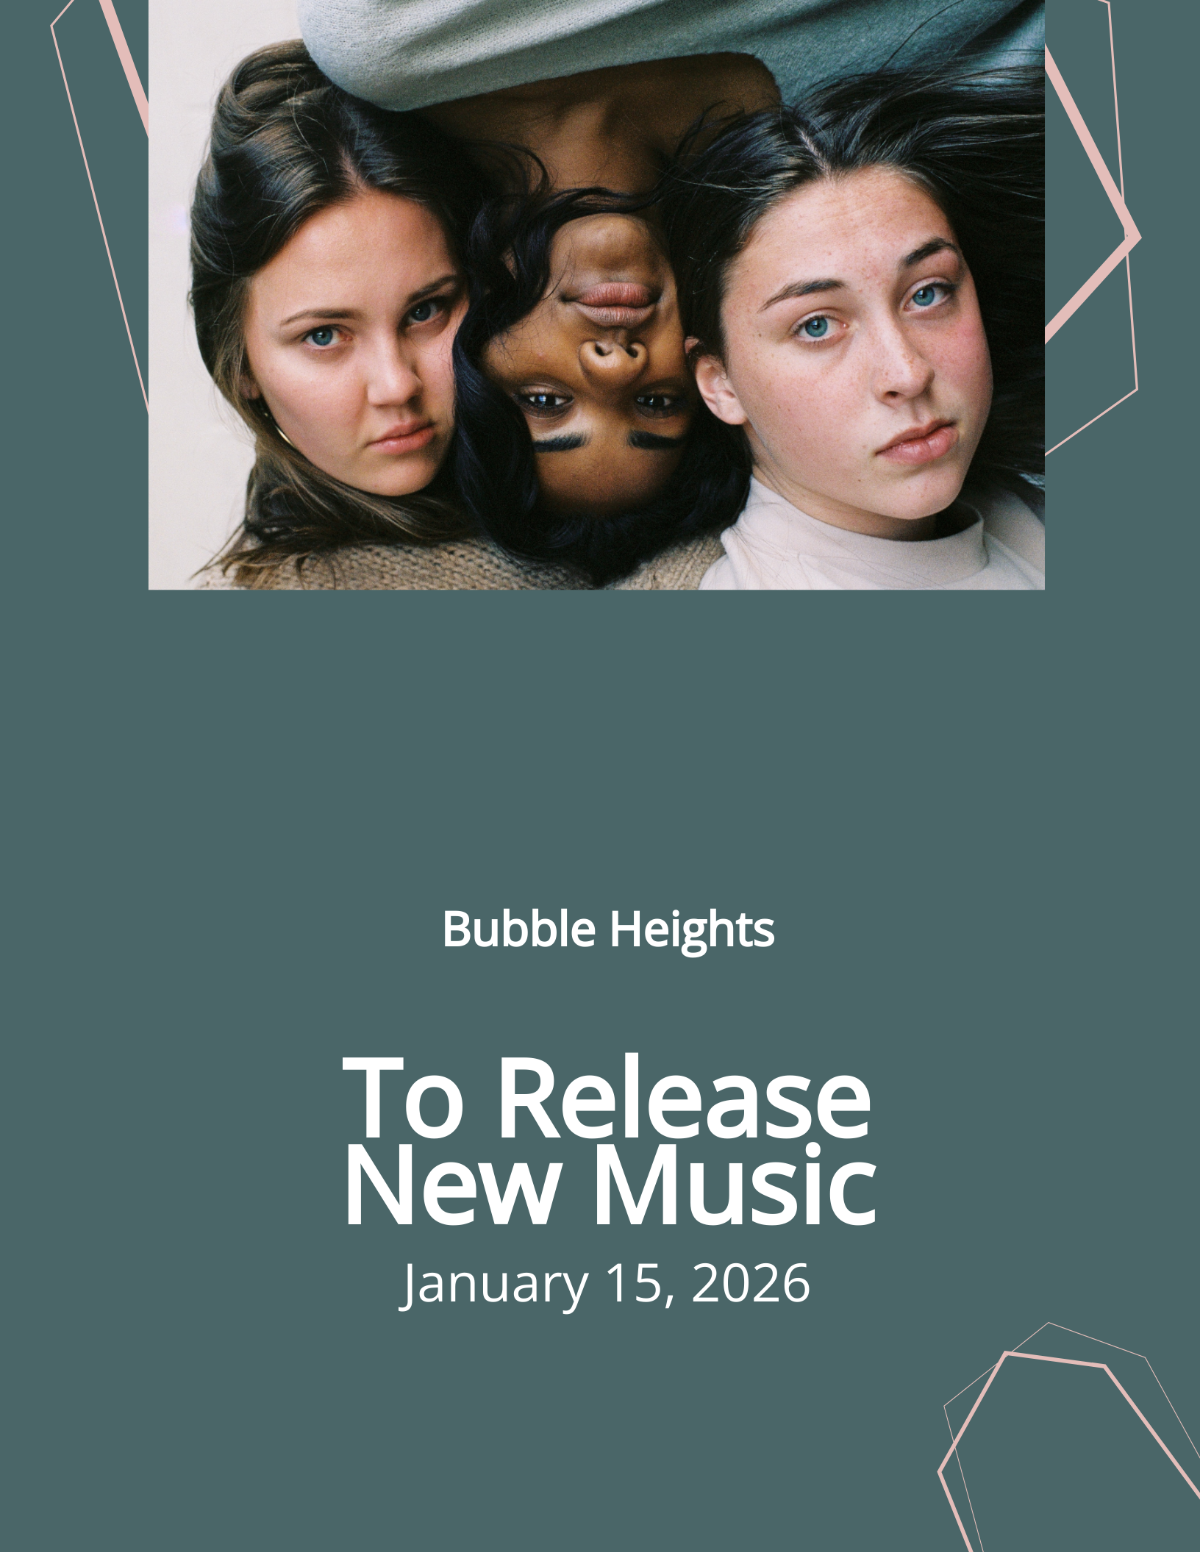 New Release Music Flyer Template